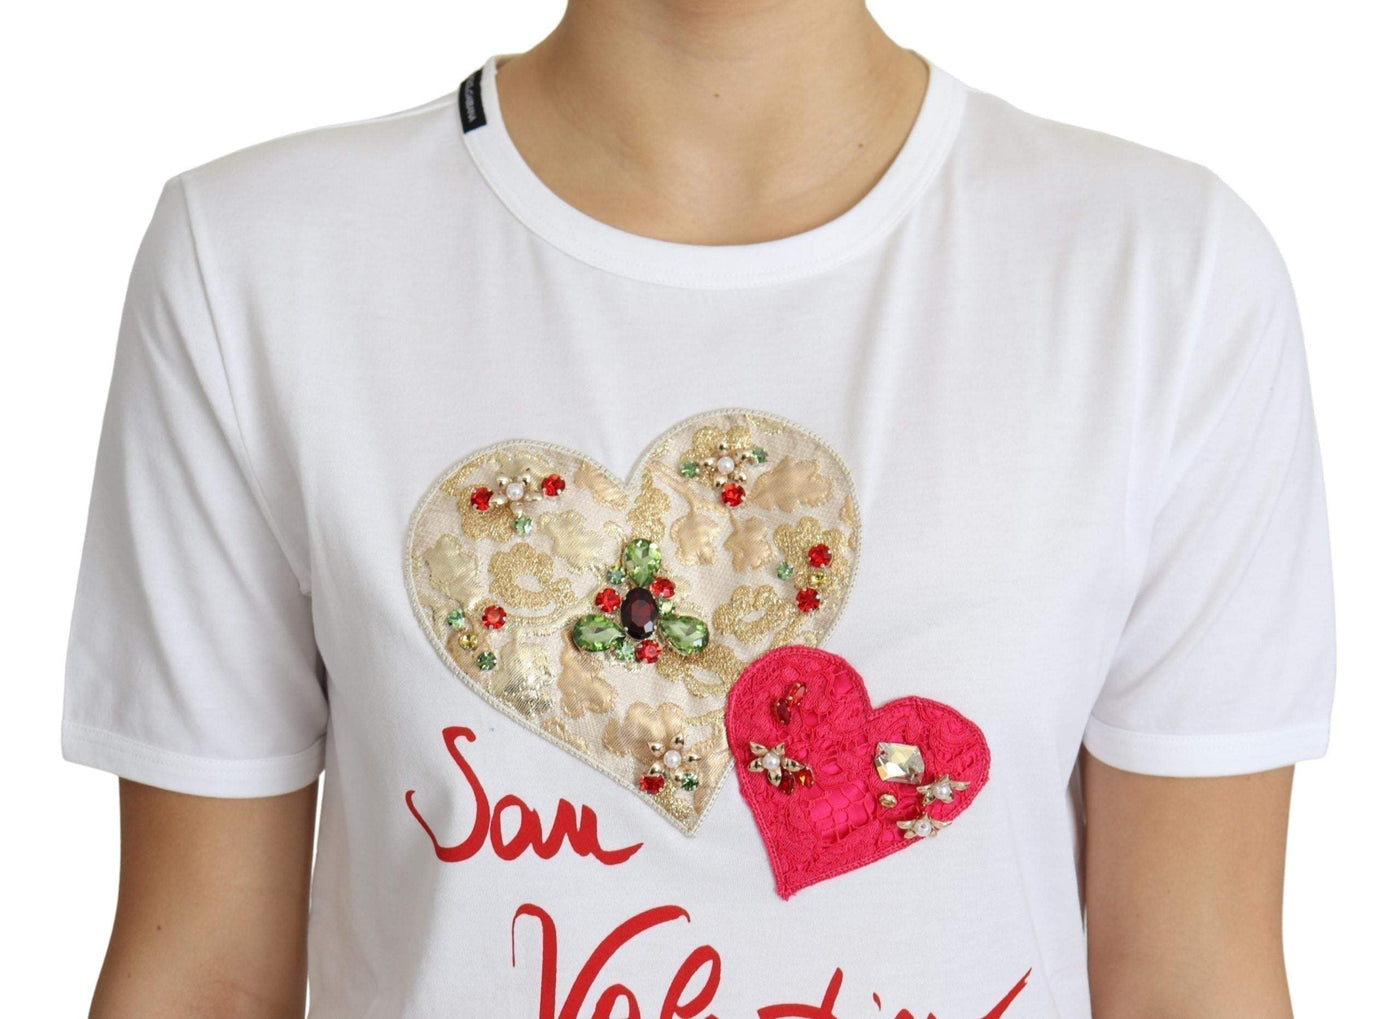 Dolce & Gabbana White San Valentino Heart Crystals T-shirt Top #women, Dolce & Gabbana, feed-agegroup-adult, feed-color-White, feed-gender-female, feed-size-IT36 | XS, IT36 | XS, Tops & T-Shirts - Women - Clothing, White, Women - New Arrivals at SEYMAYKA